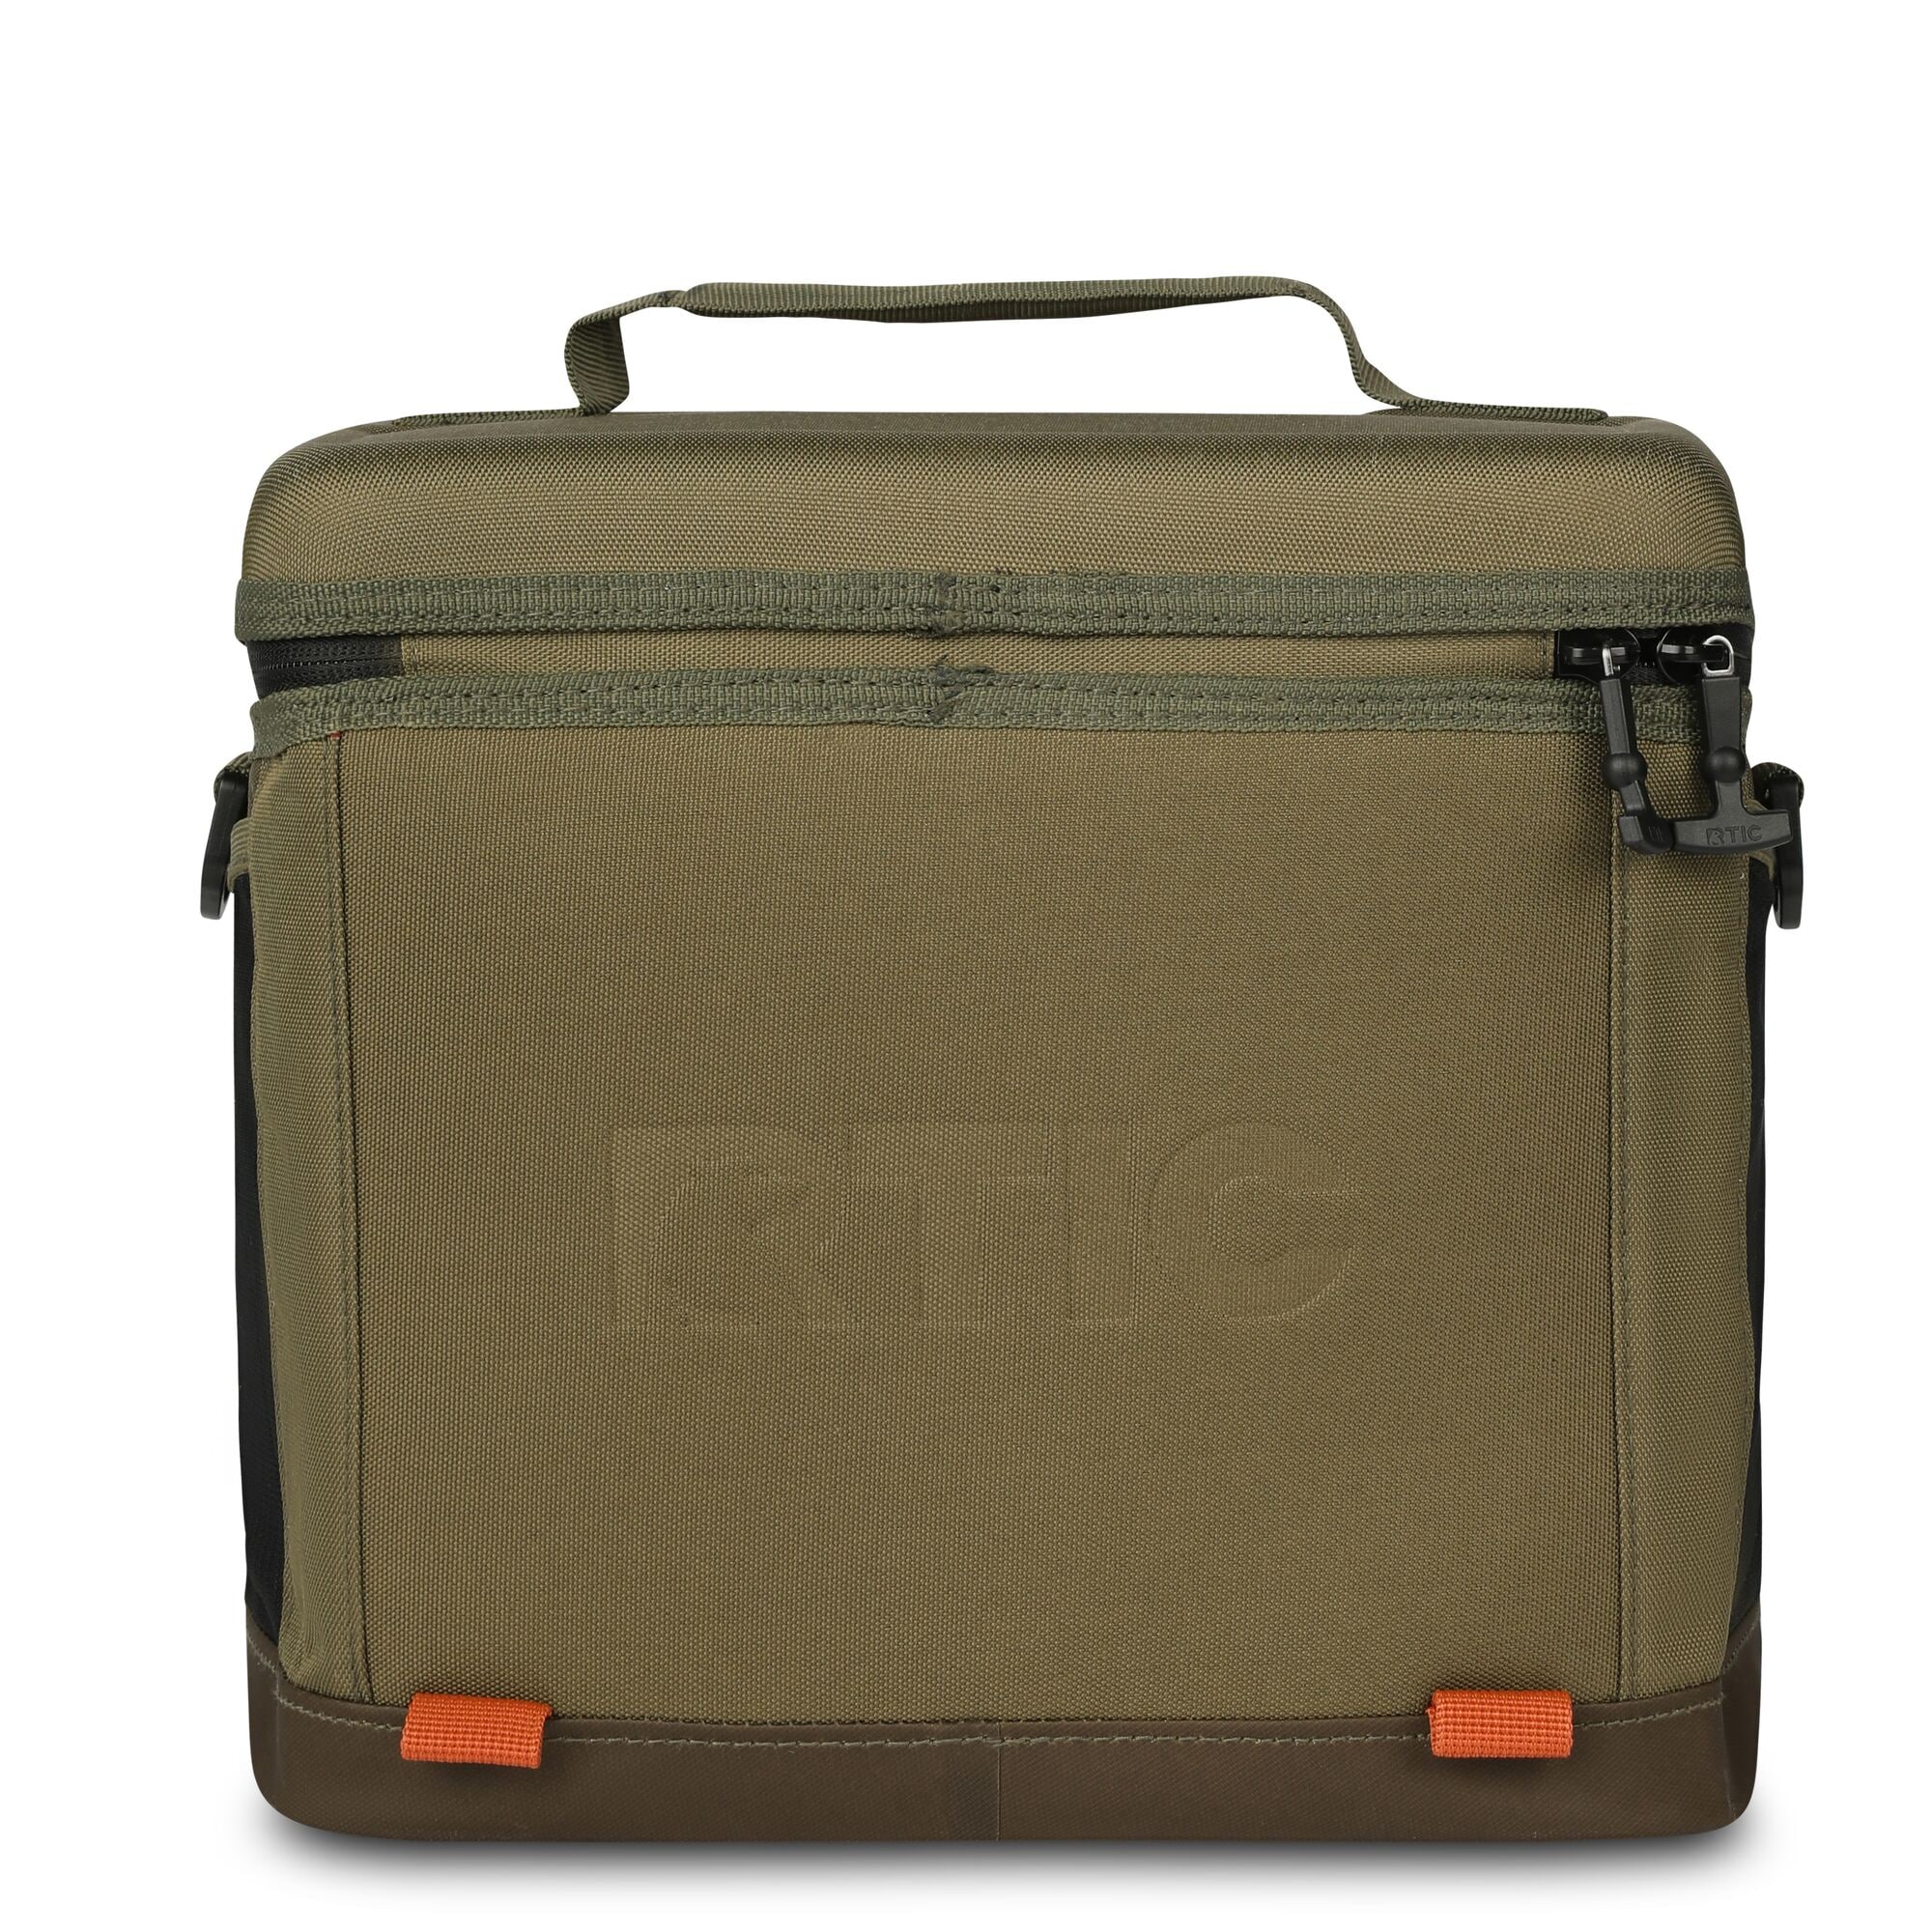 RTIC: The Everyday Cooler, Your New Go-To.